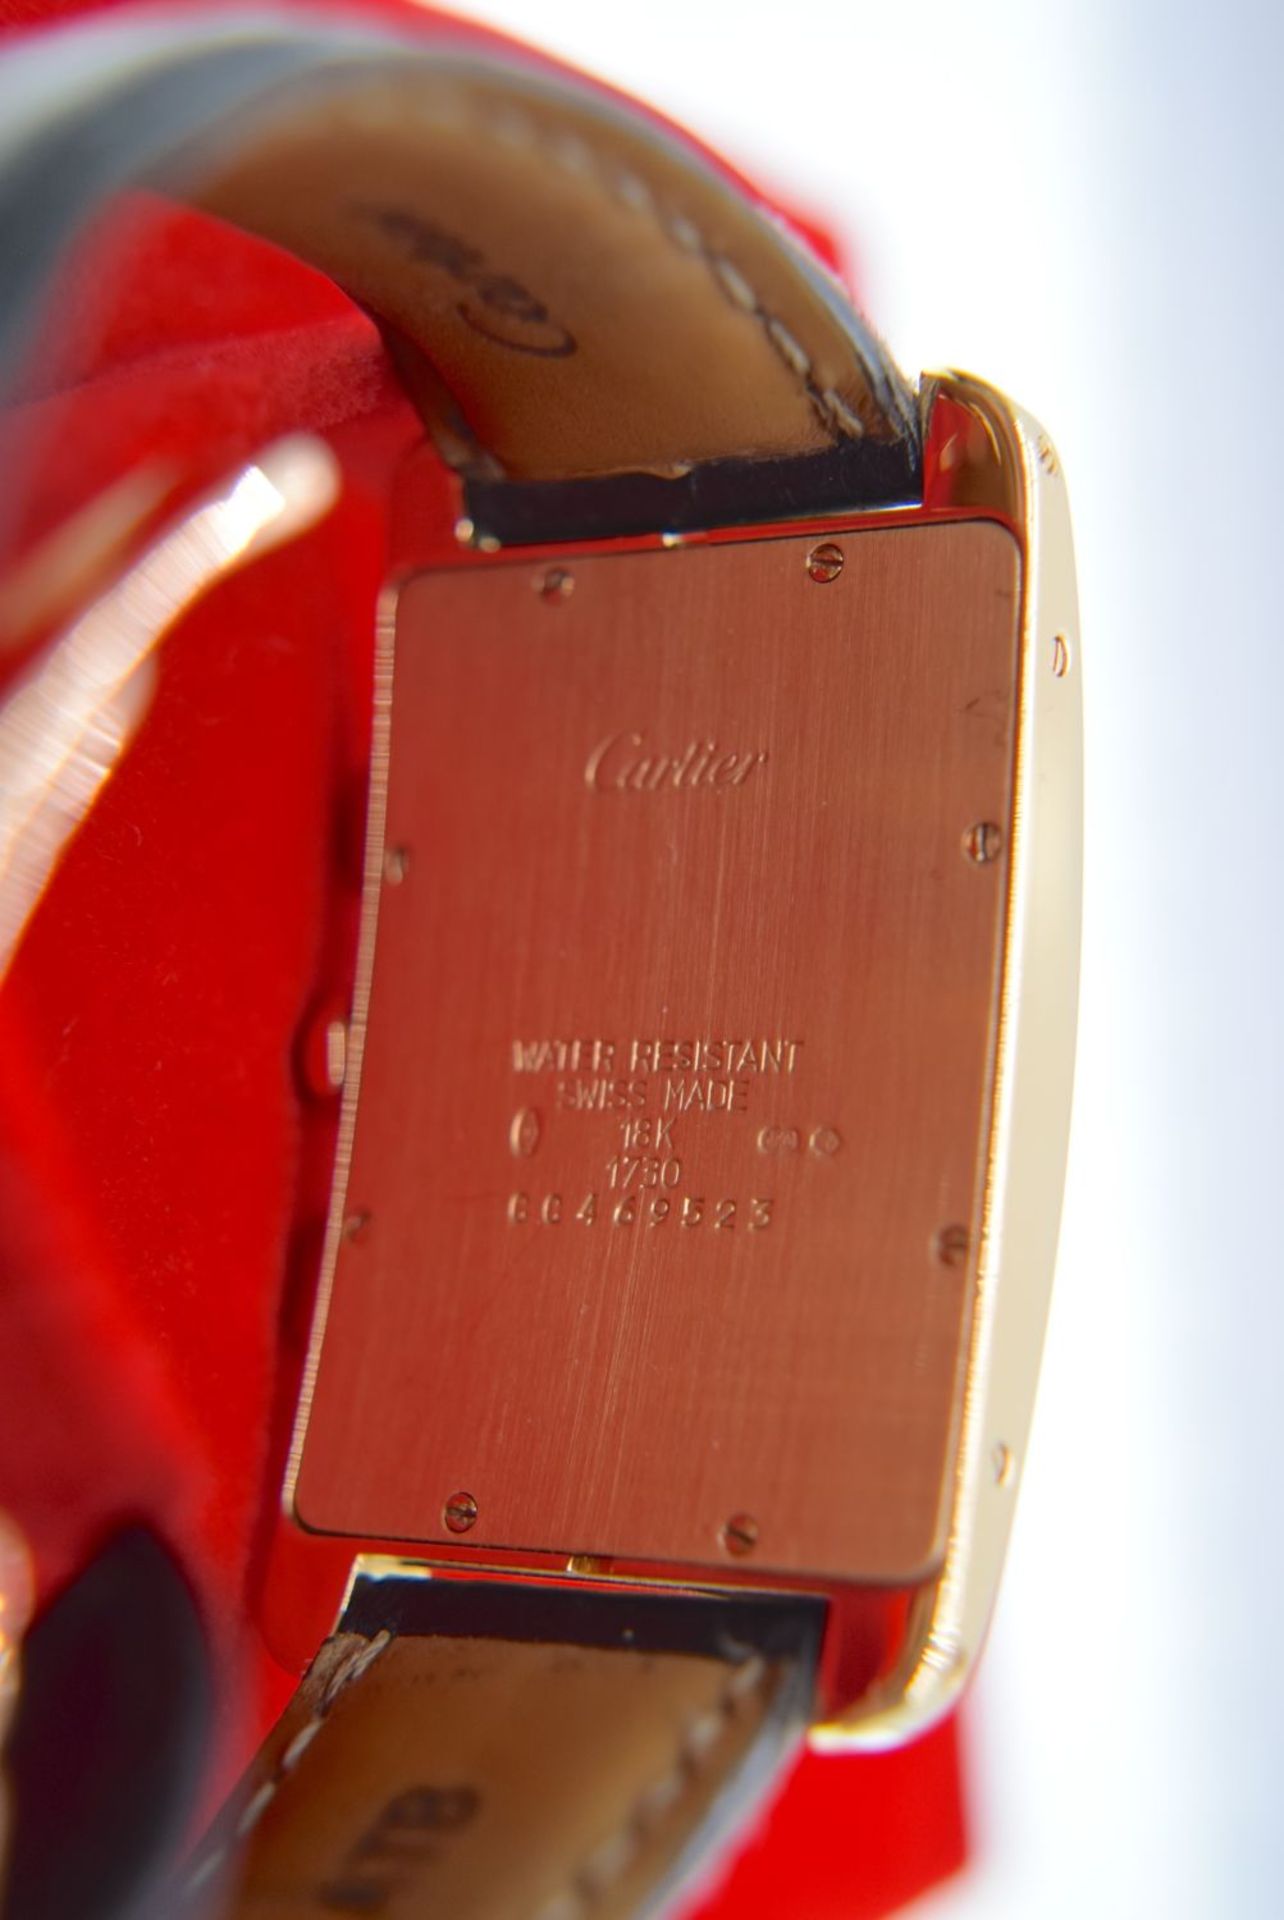 18K GOLD CARTIER TANK AMERICAINE REF. 1730 ON BLACK LEATHER WITH CARTIER SIGNED CLASP - Image 8 of 8